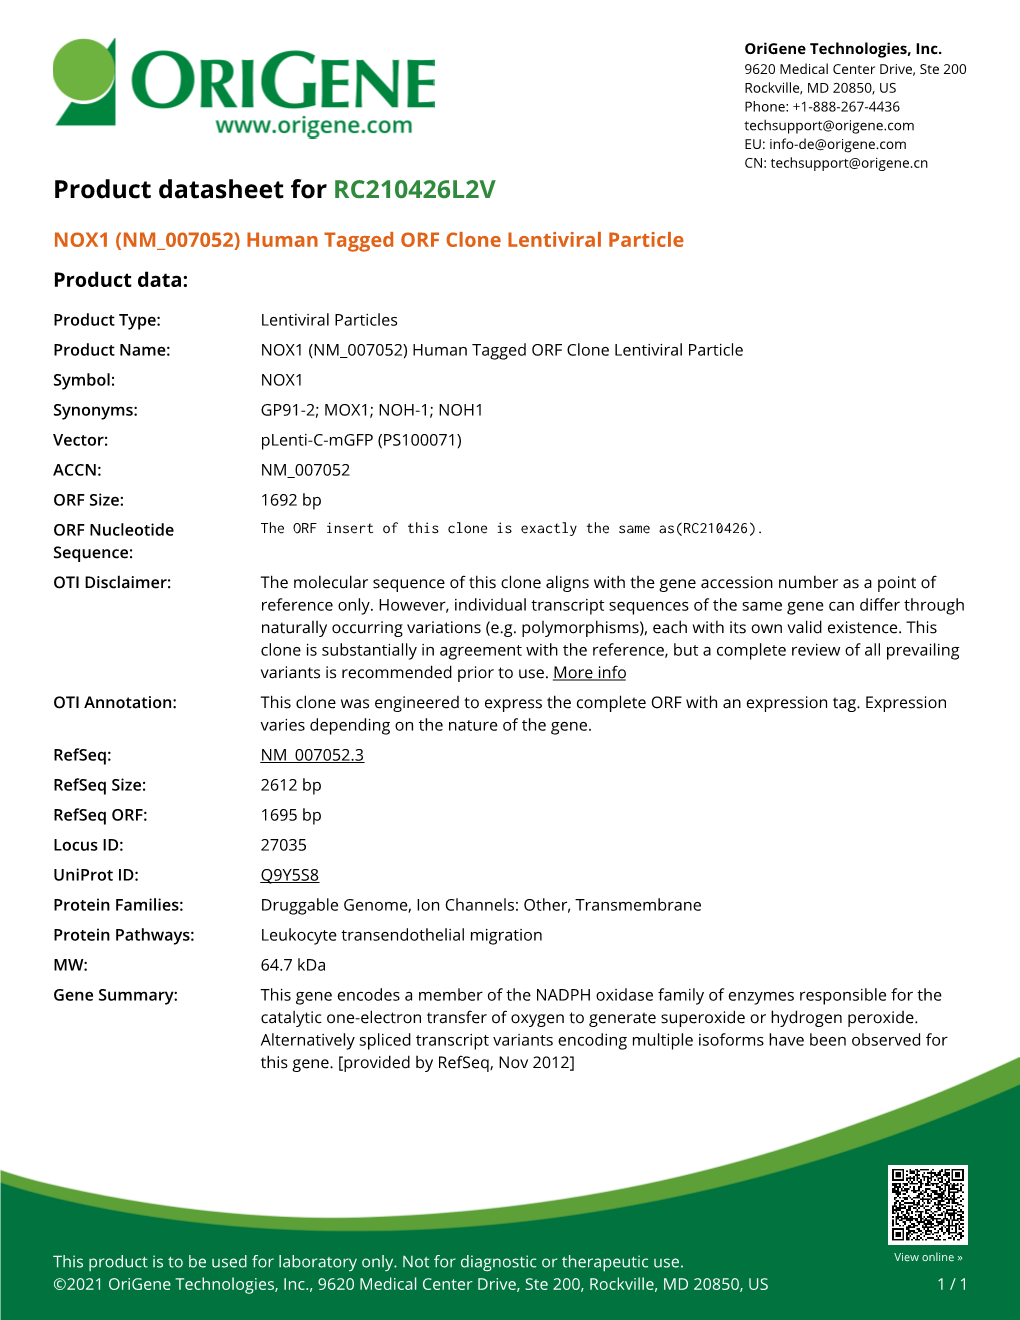 NOX1 (NM 007052) Human Tagged ORF Clone Lentiviral Particle Product Data